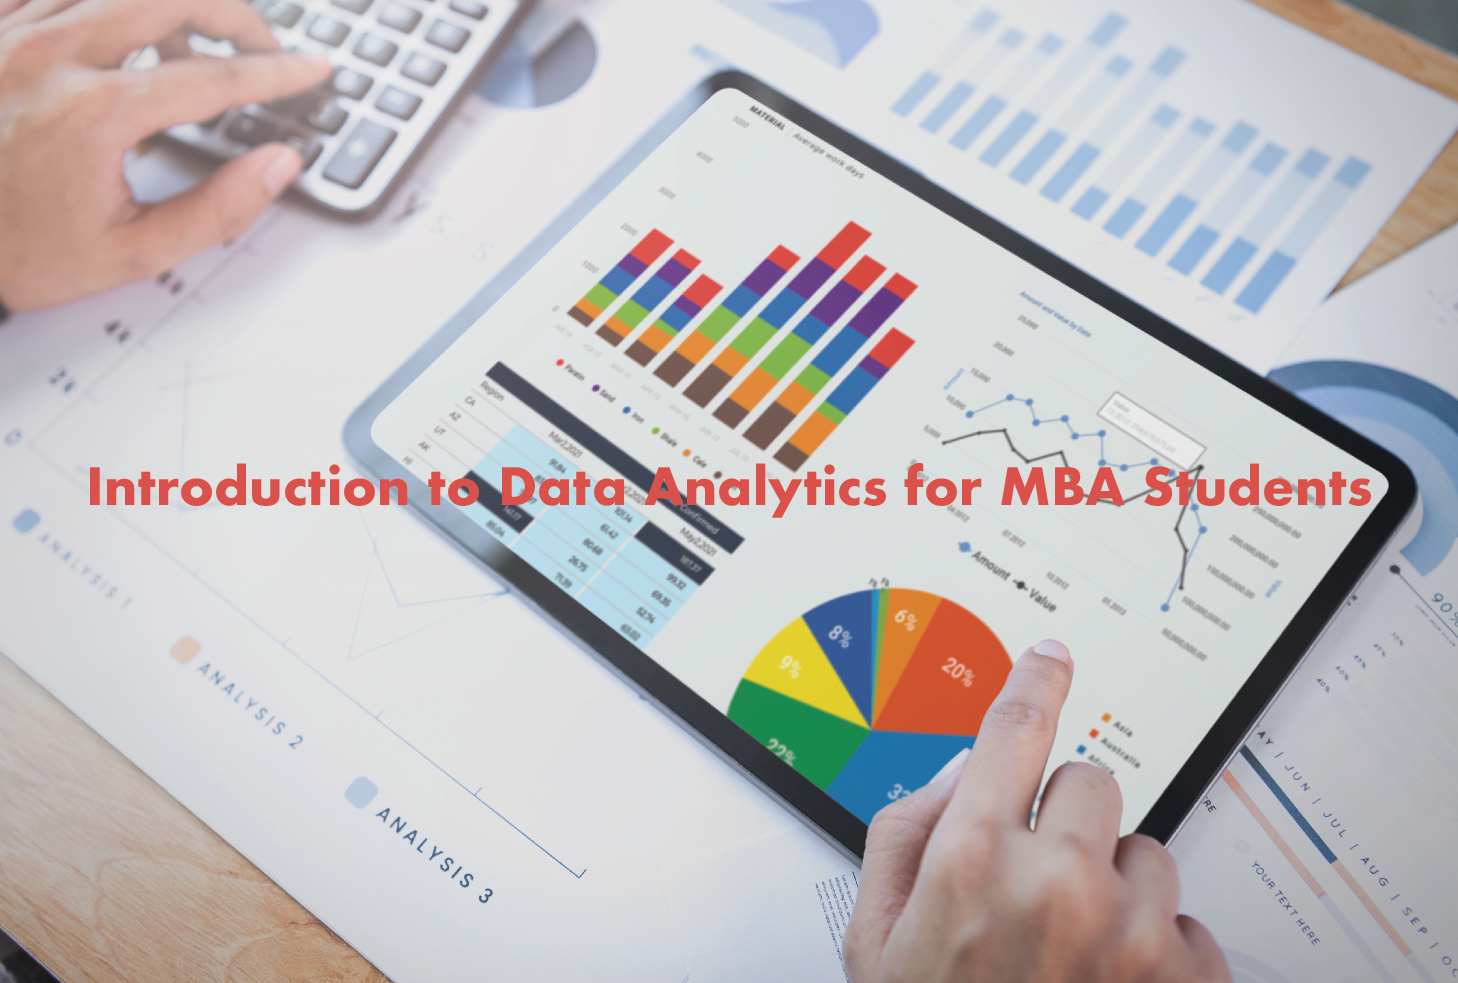 Introduction to Data Analytics for MBA Students